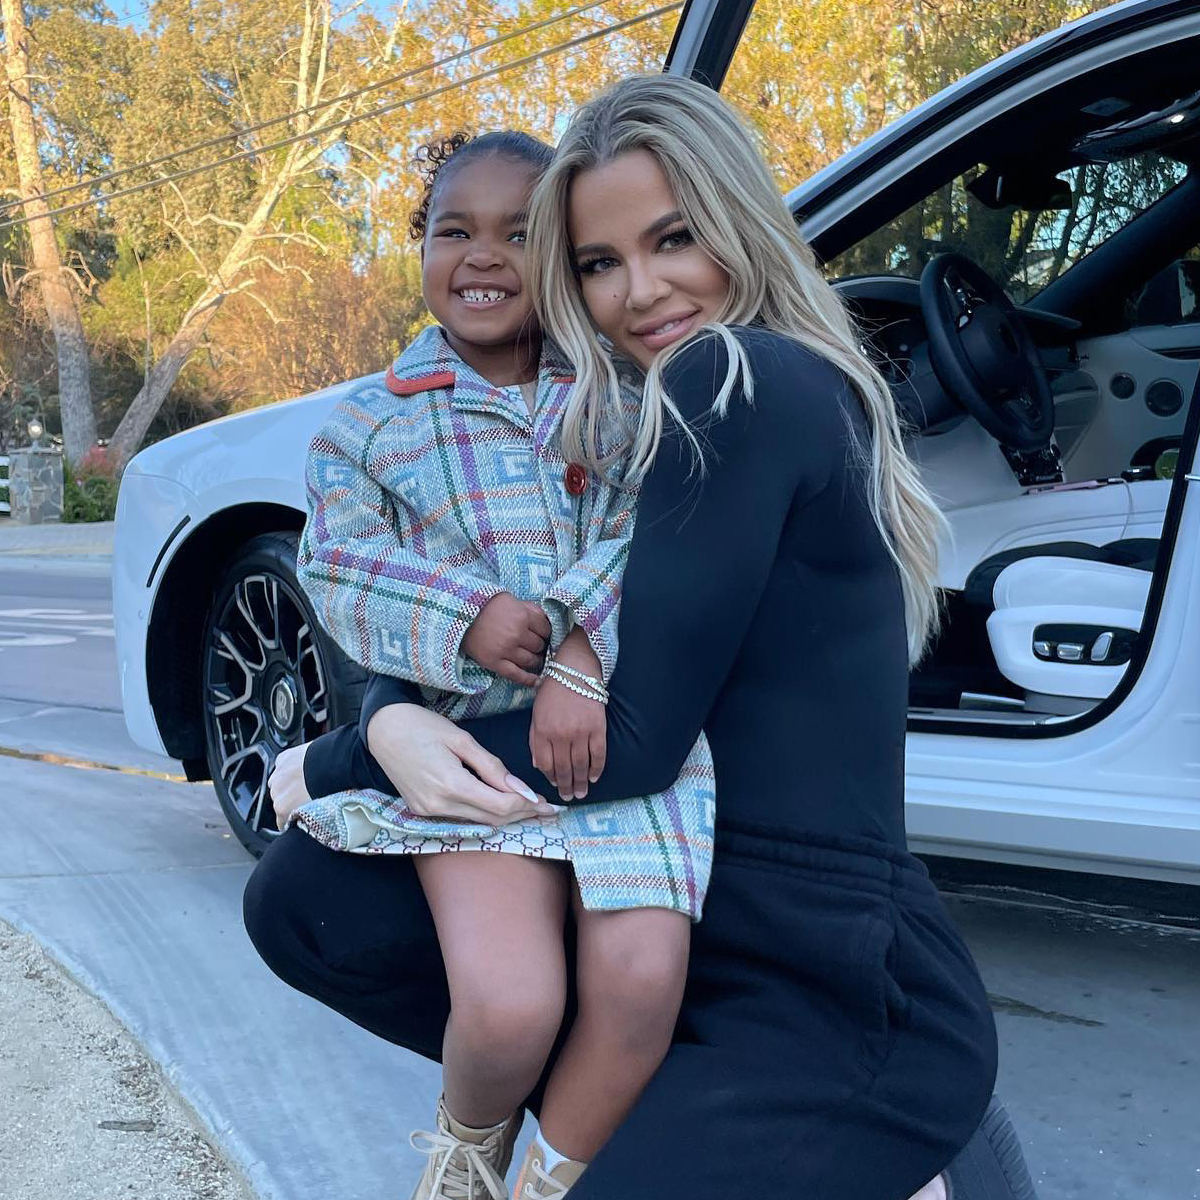 Did Khloé Kardashian or True Thompson have the best outfit this week?